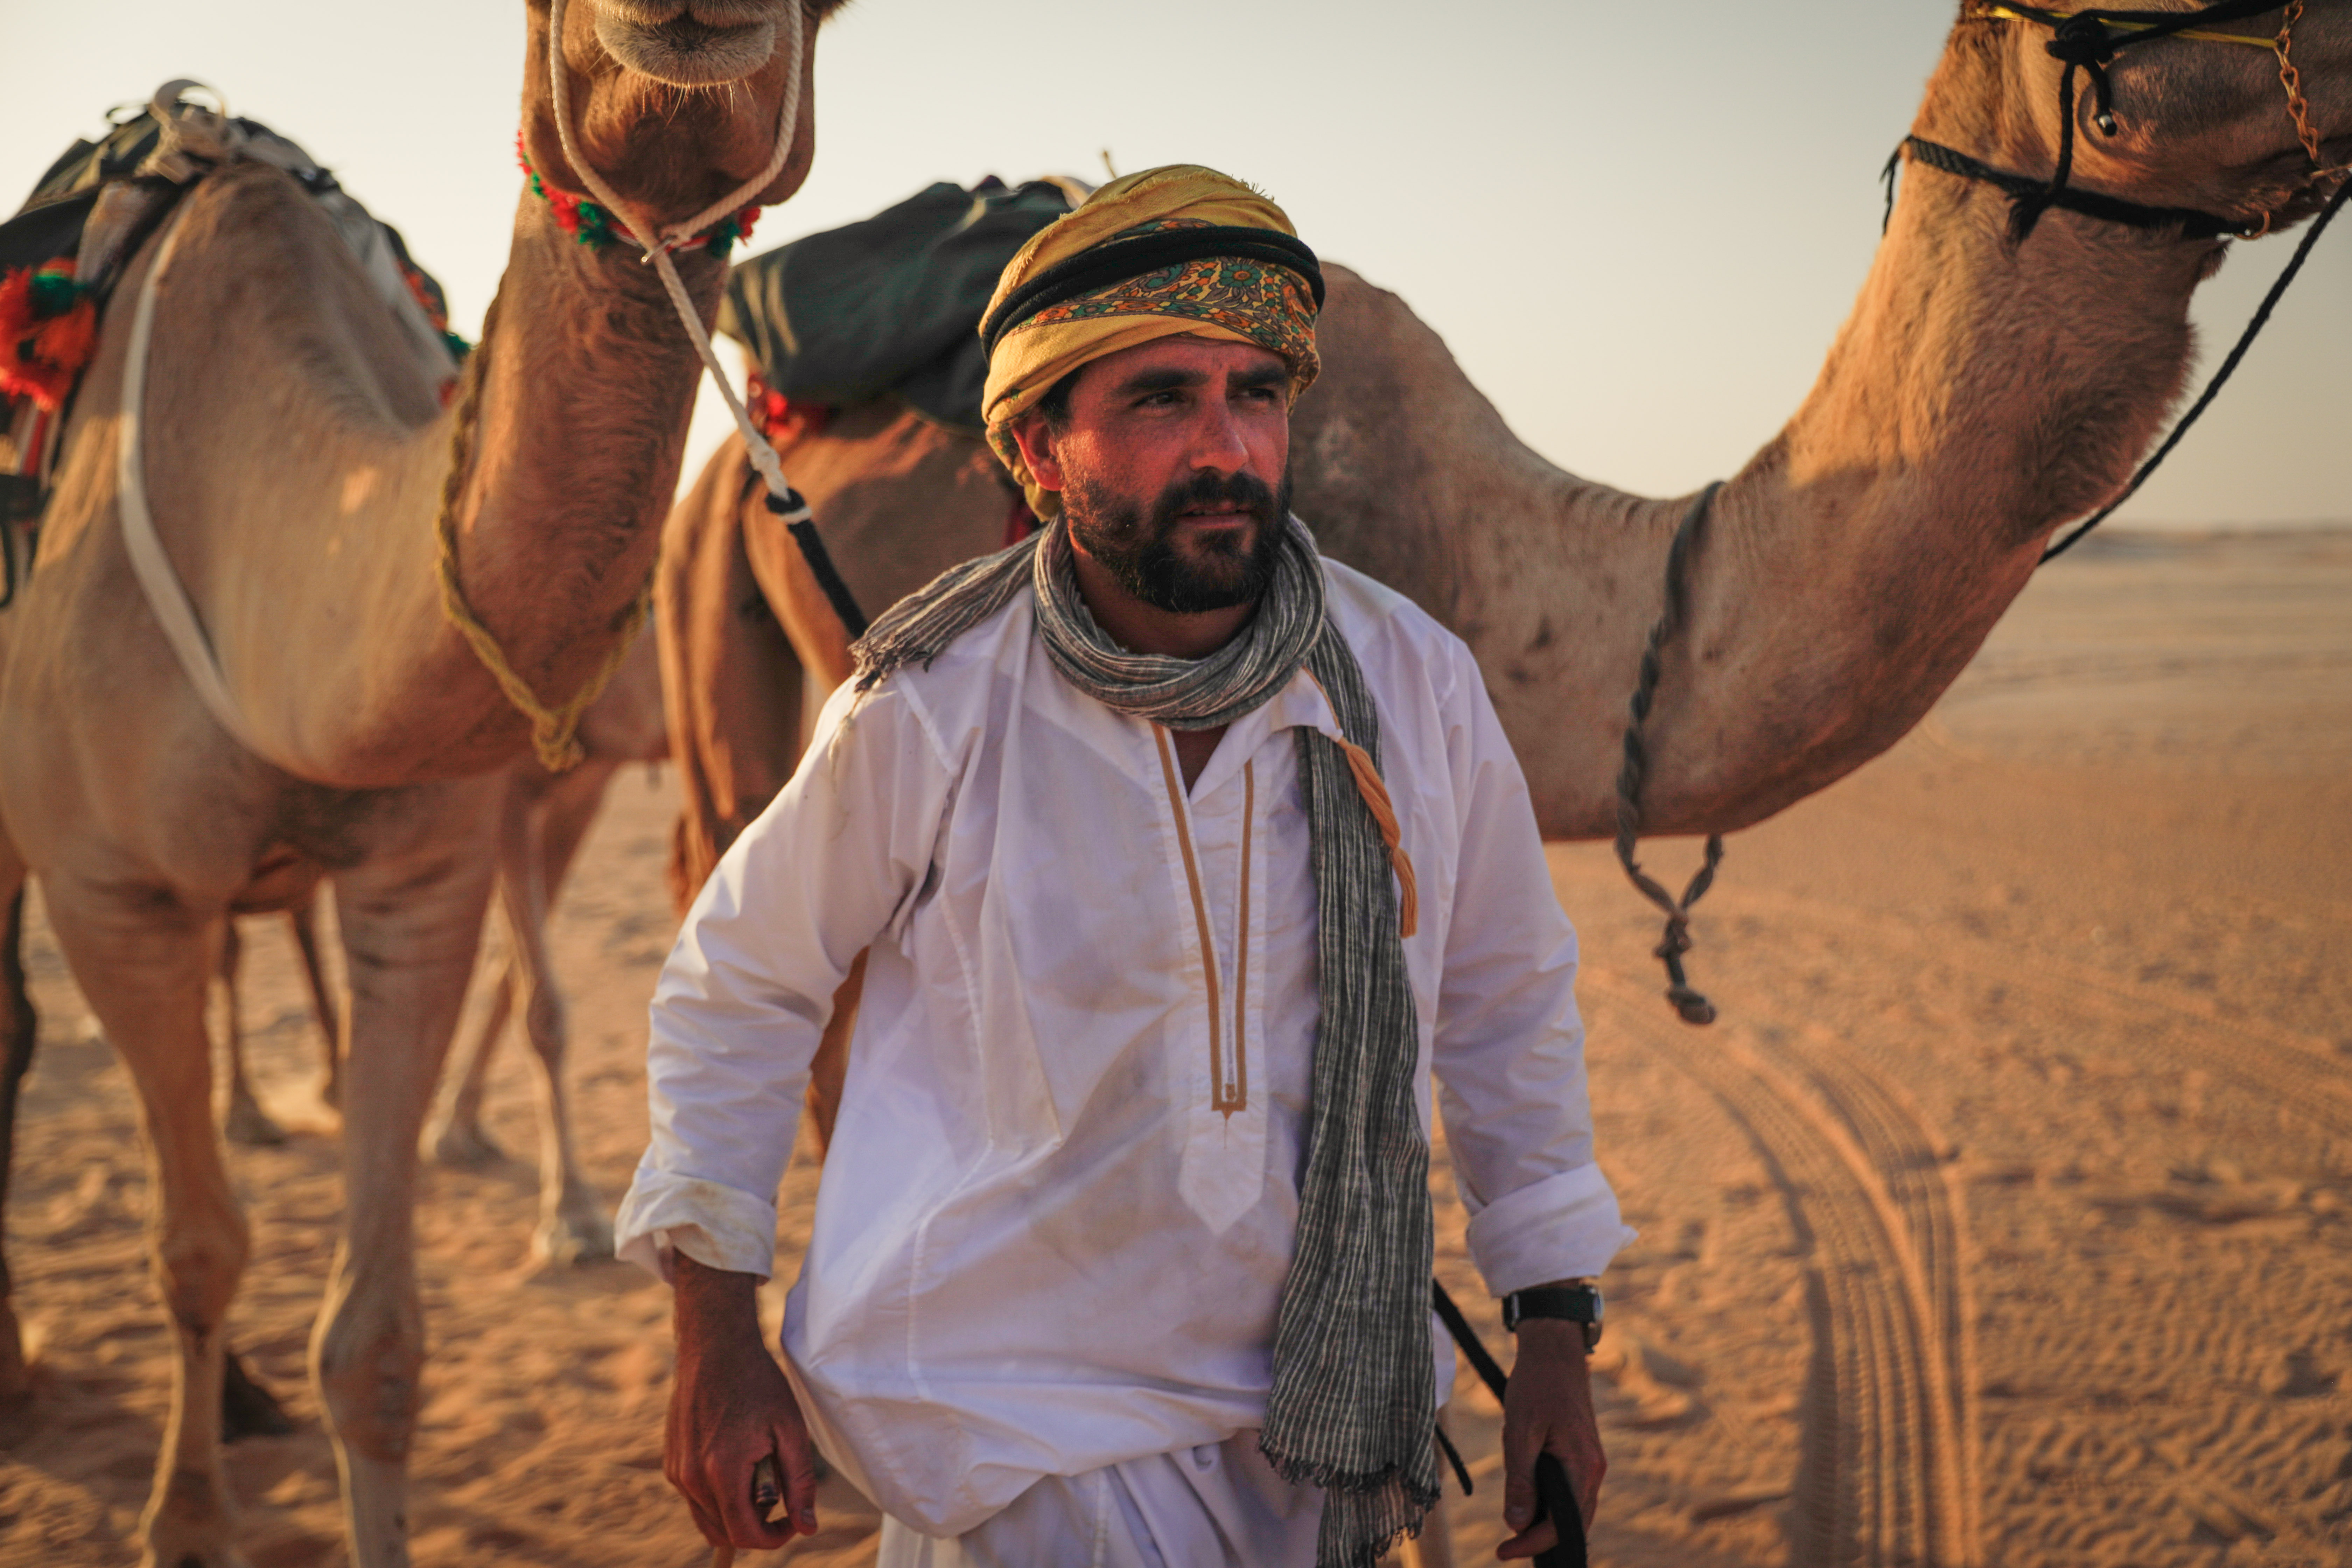 levison wood in arabia next to two camels